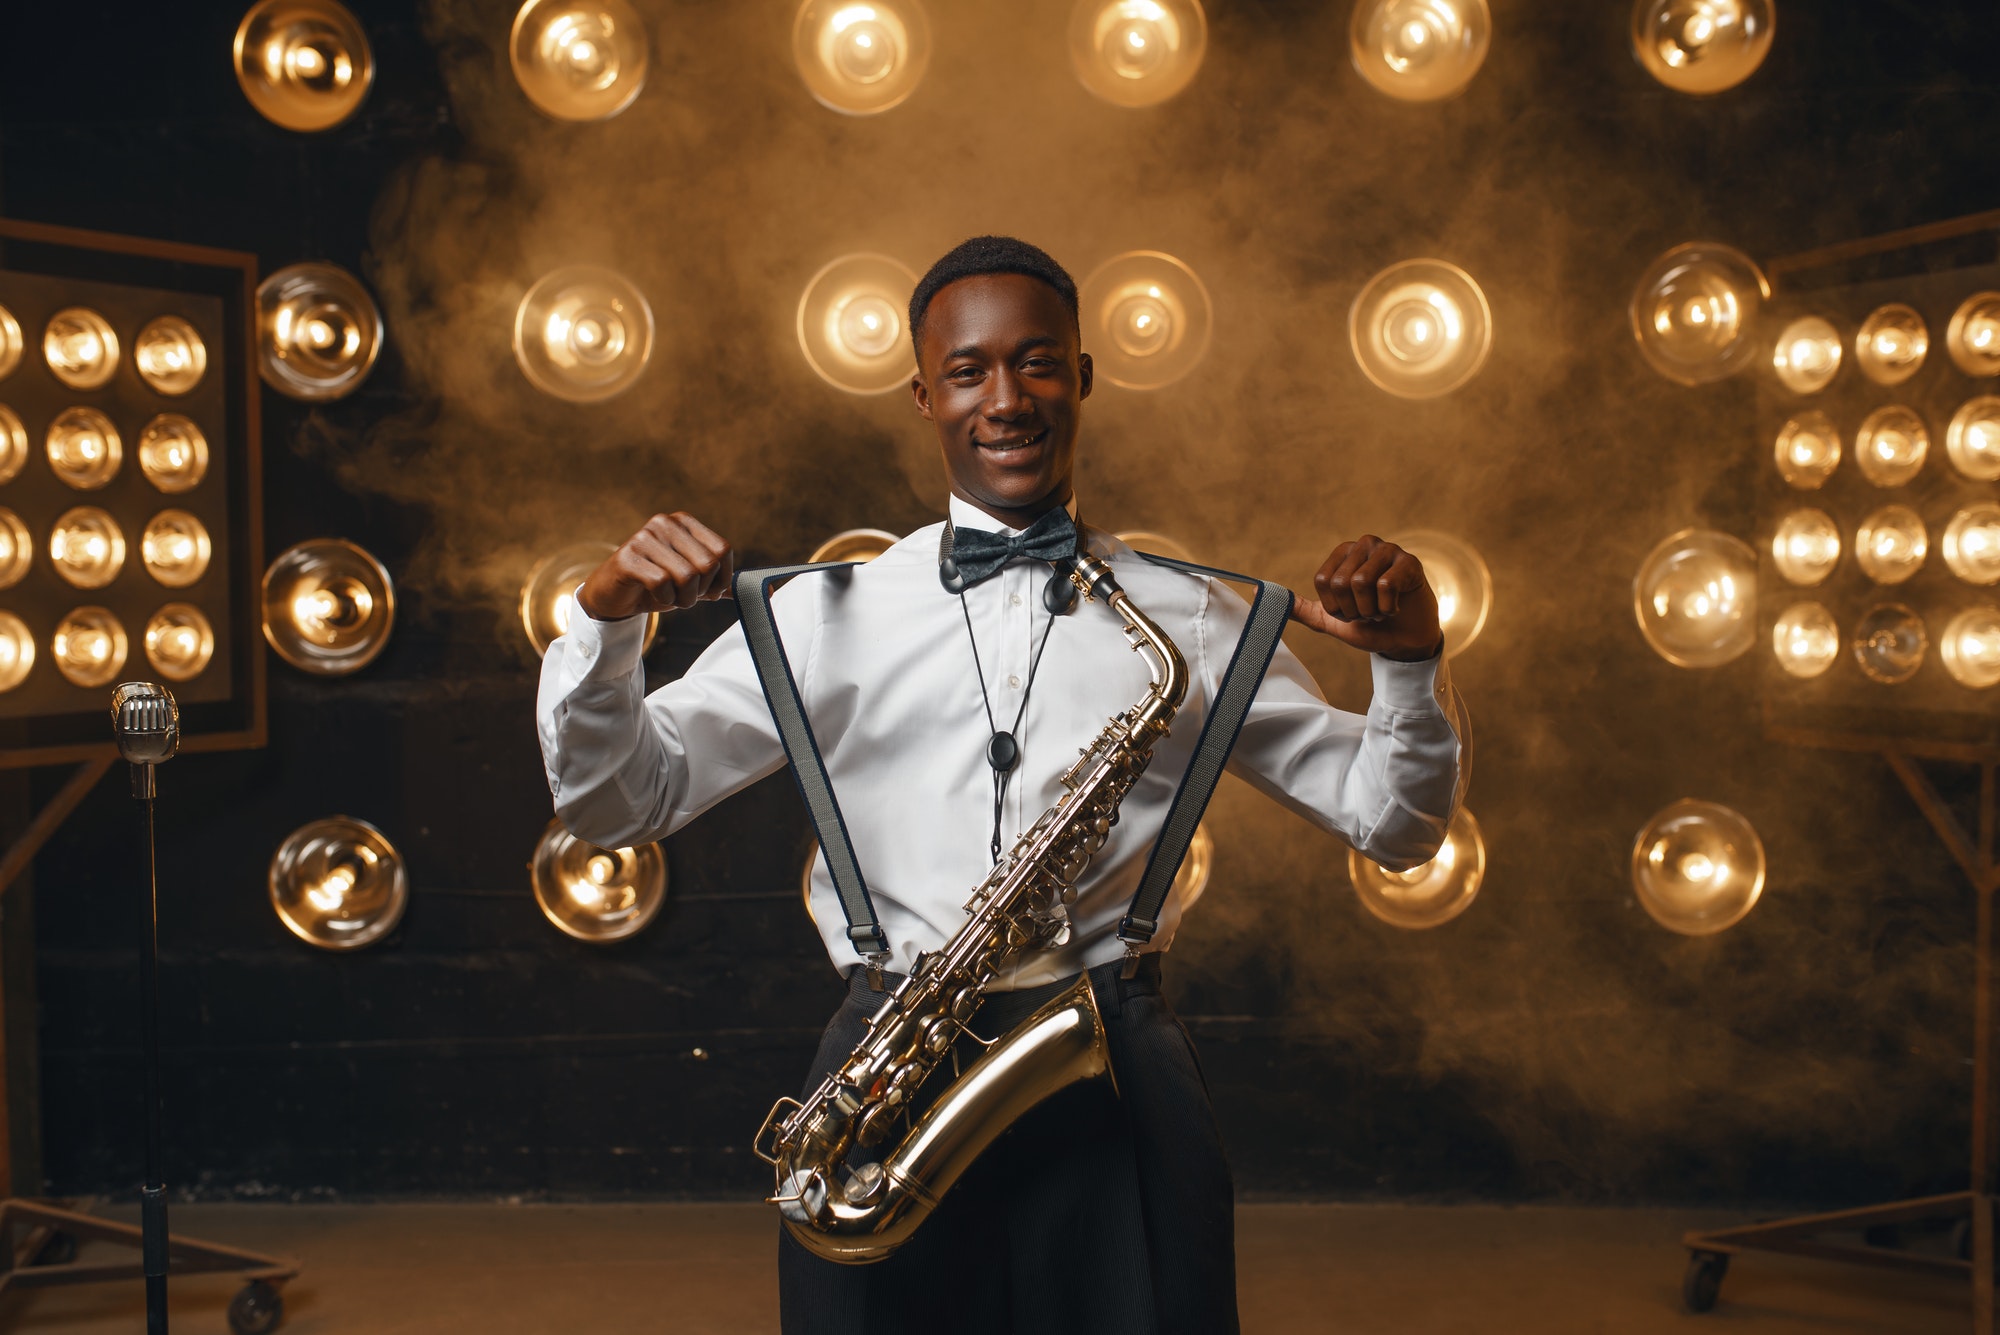 Smiling jazz performer with saxophone on stage